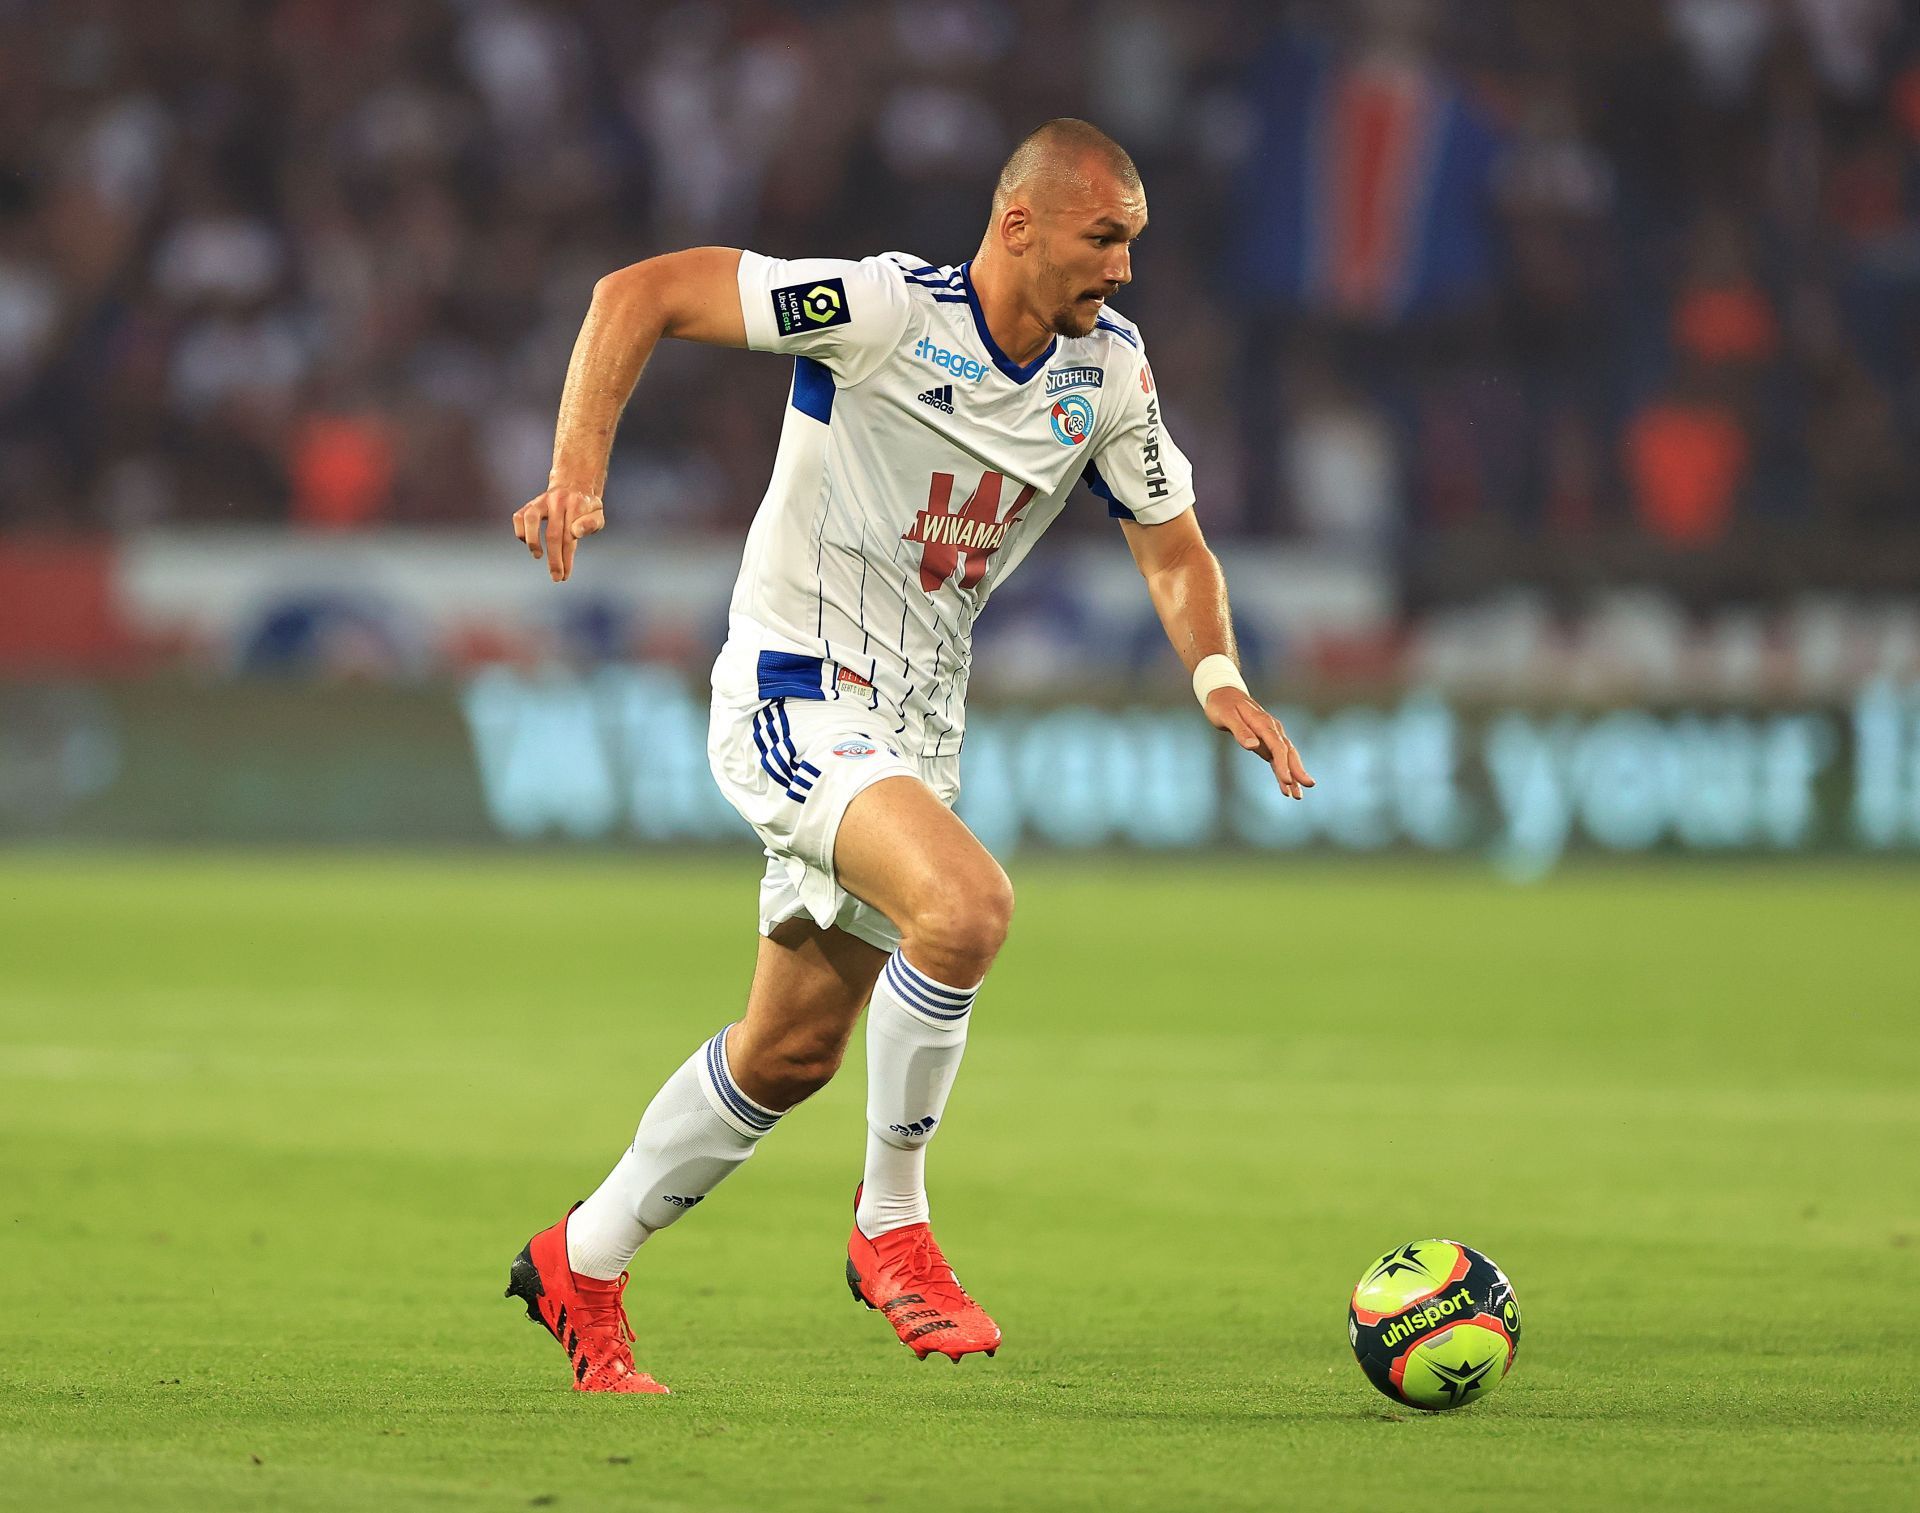 RC Strasbourg will face Angers on Sunday - Ligue 1 Uber Eats